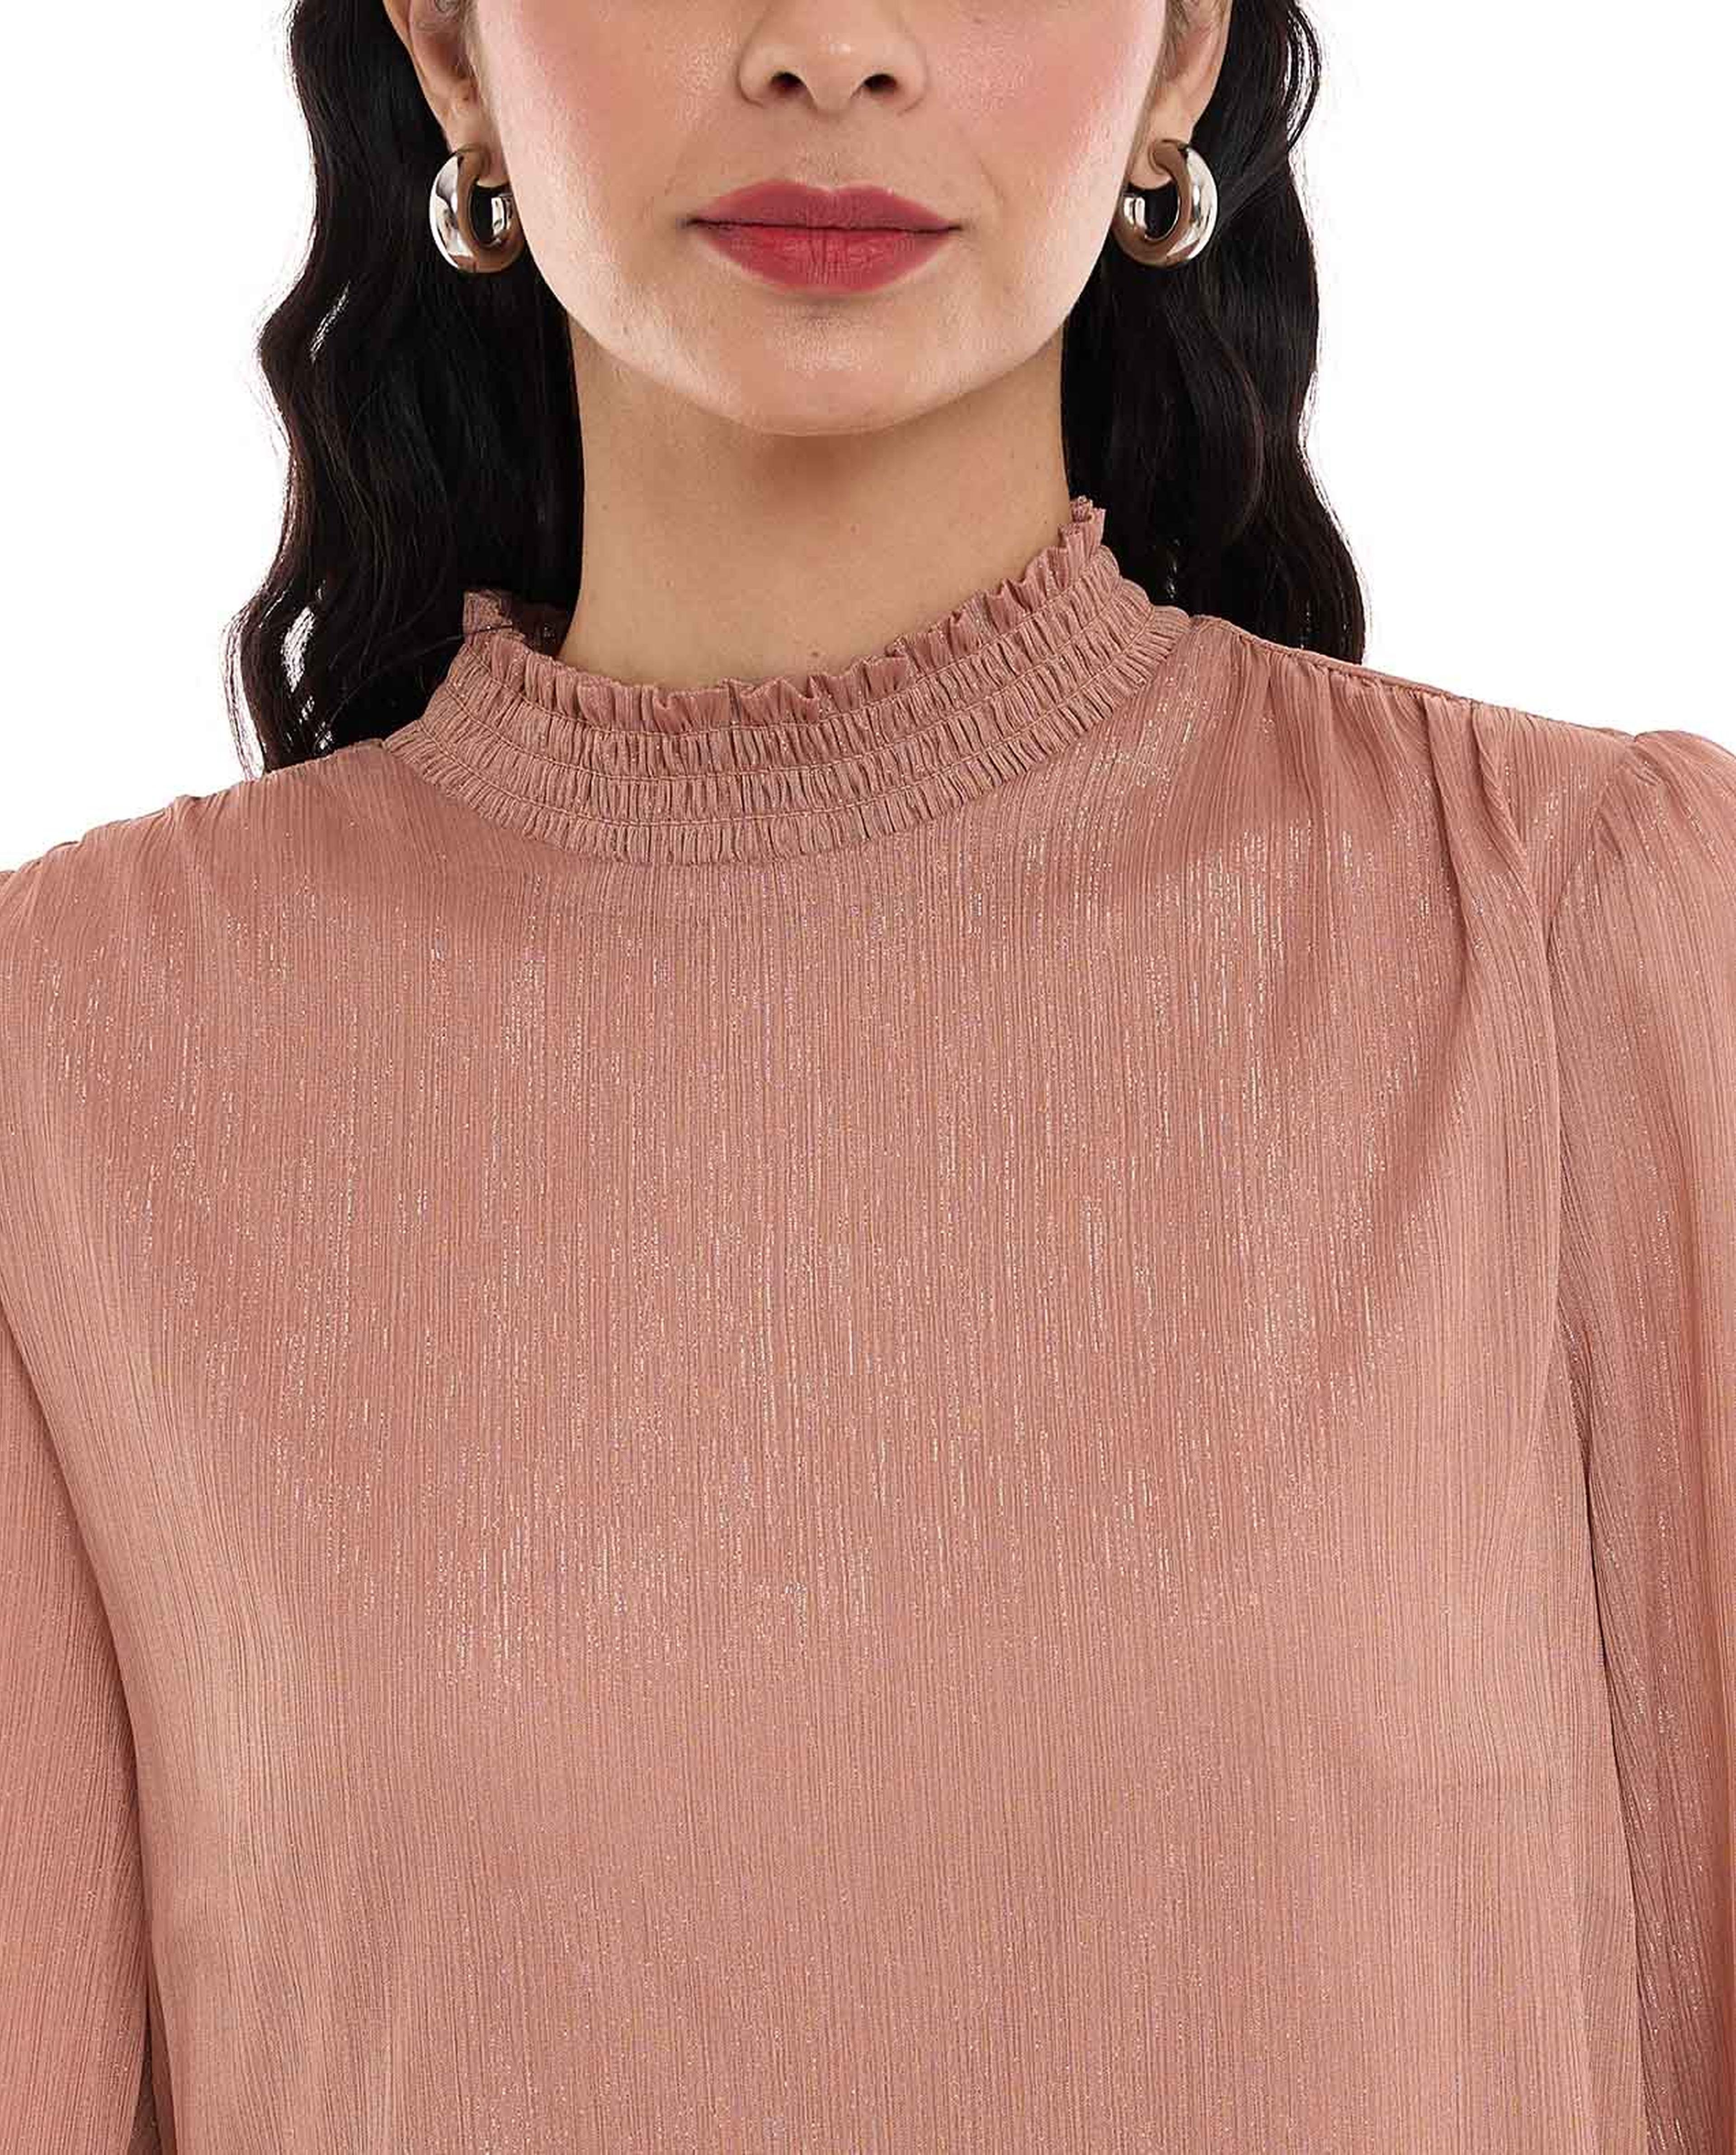 Shimmer Top with Mock Neck and Bishop Sleeves